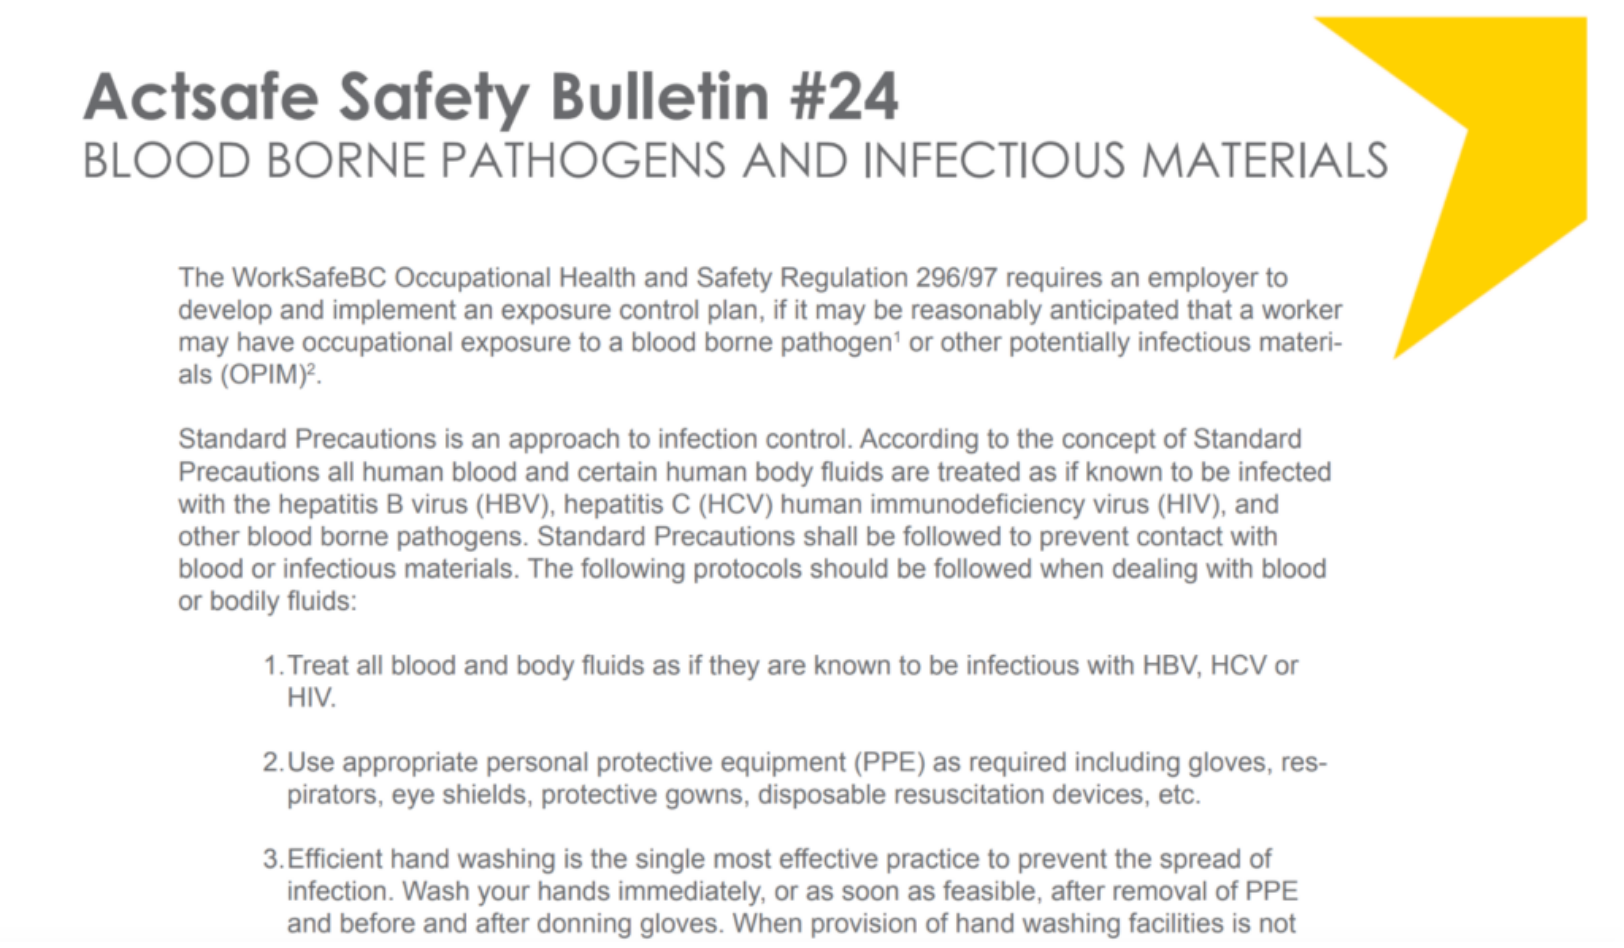 Blood Borne Pathogens and Infectious Materials